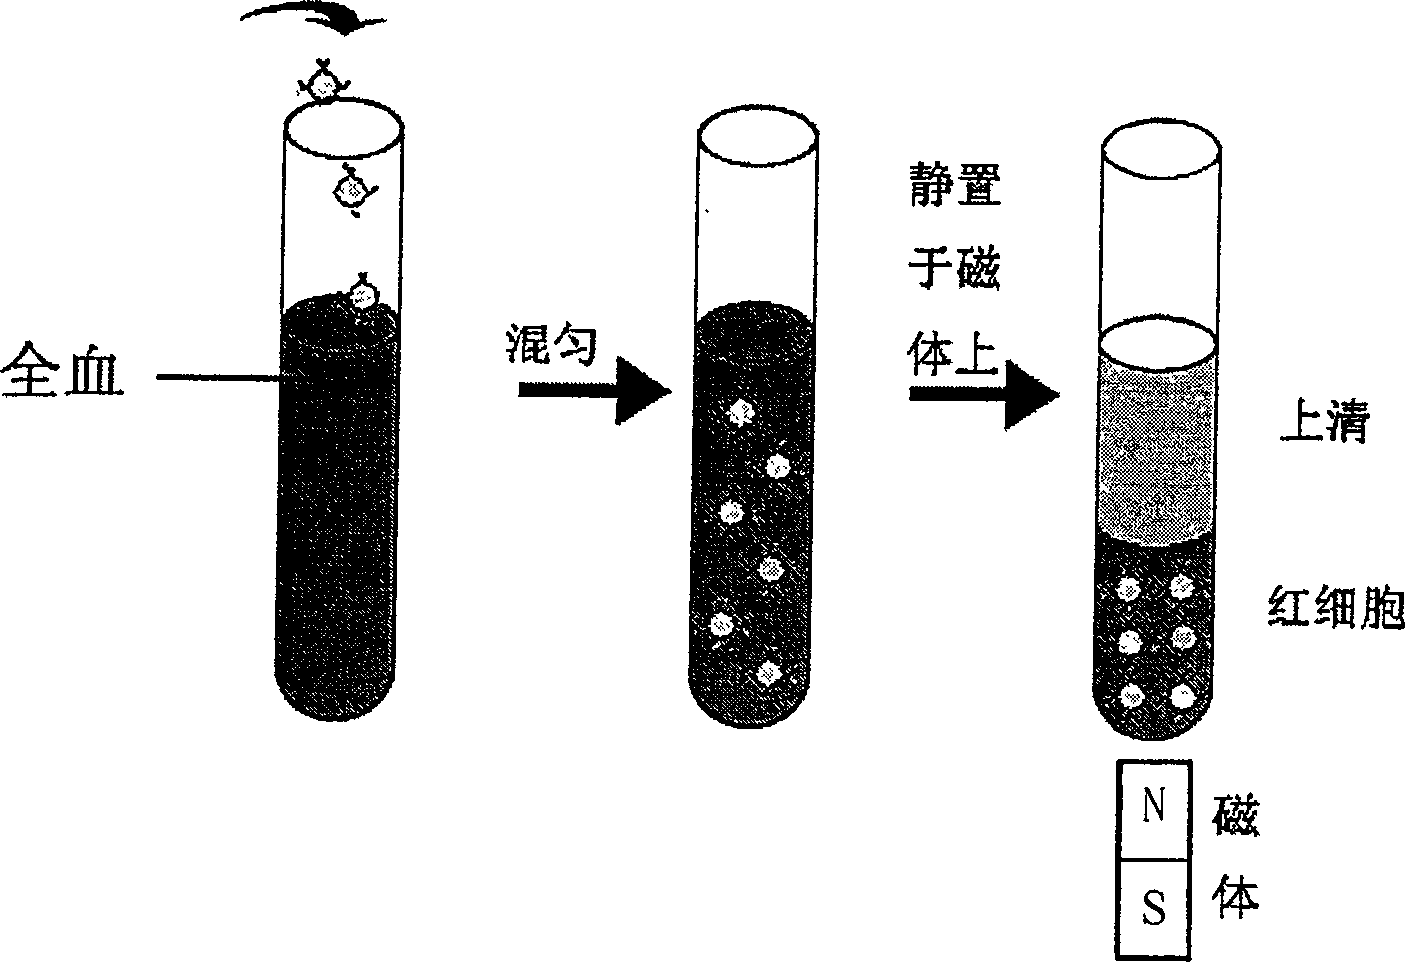 Method for rapidly separating supernatant from human whole blood or suspended red blood cells by utilizing lyophilized preparation